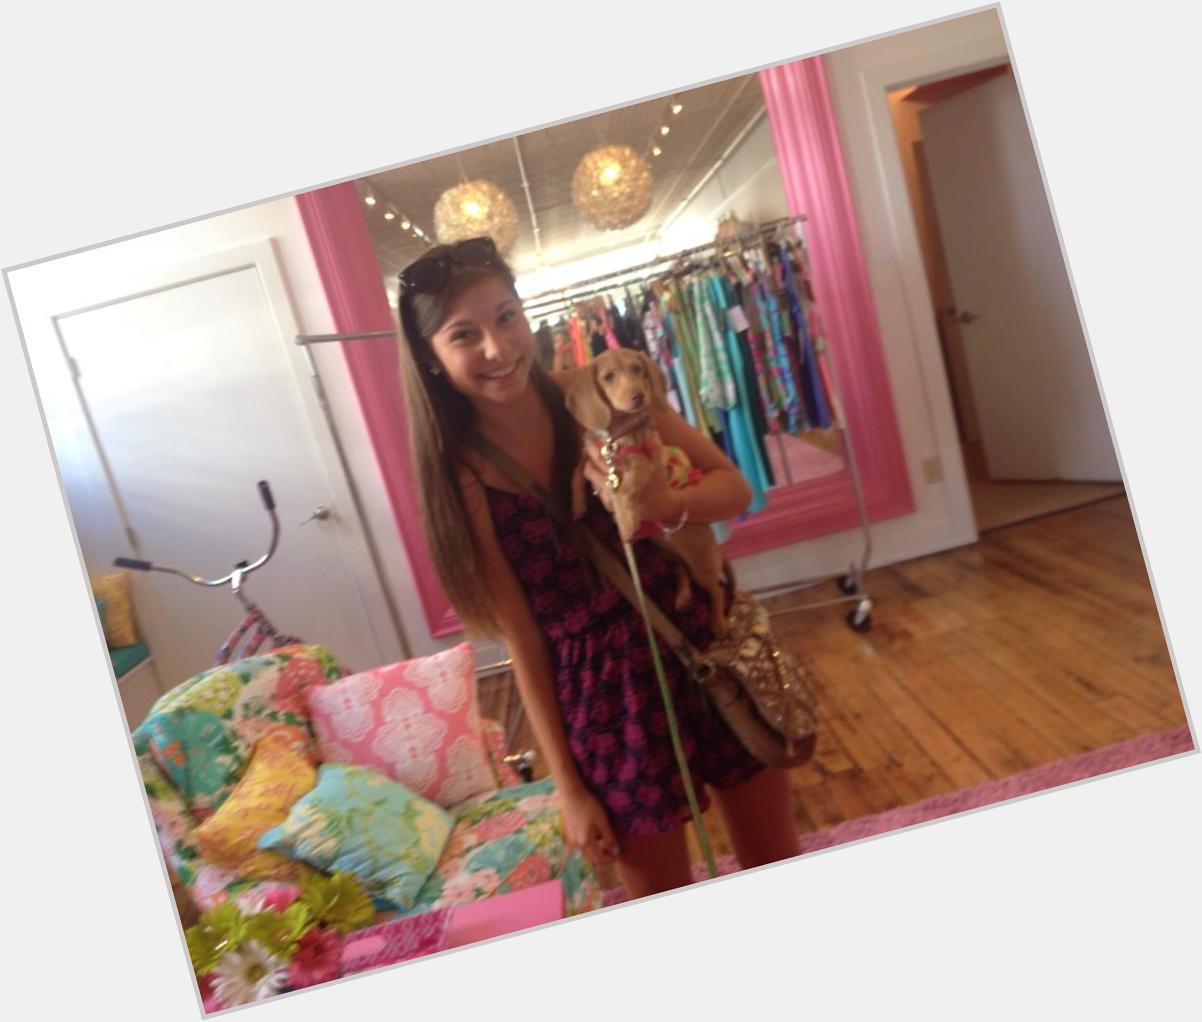 Throwing it back to the Lilly Pulitzer store over the summer in honor of Lilly Pulitzer, Happy birthday  